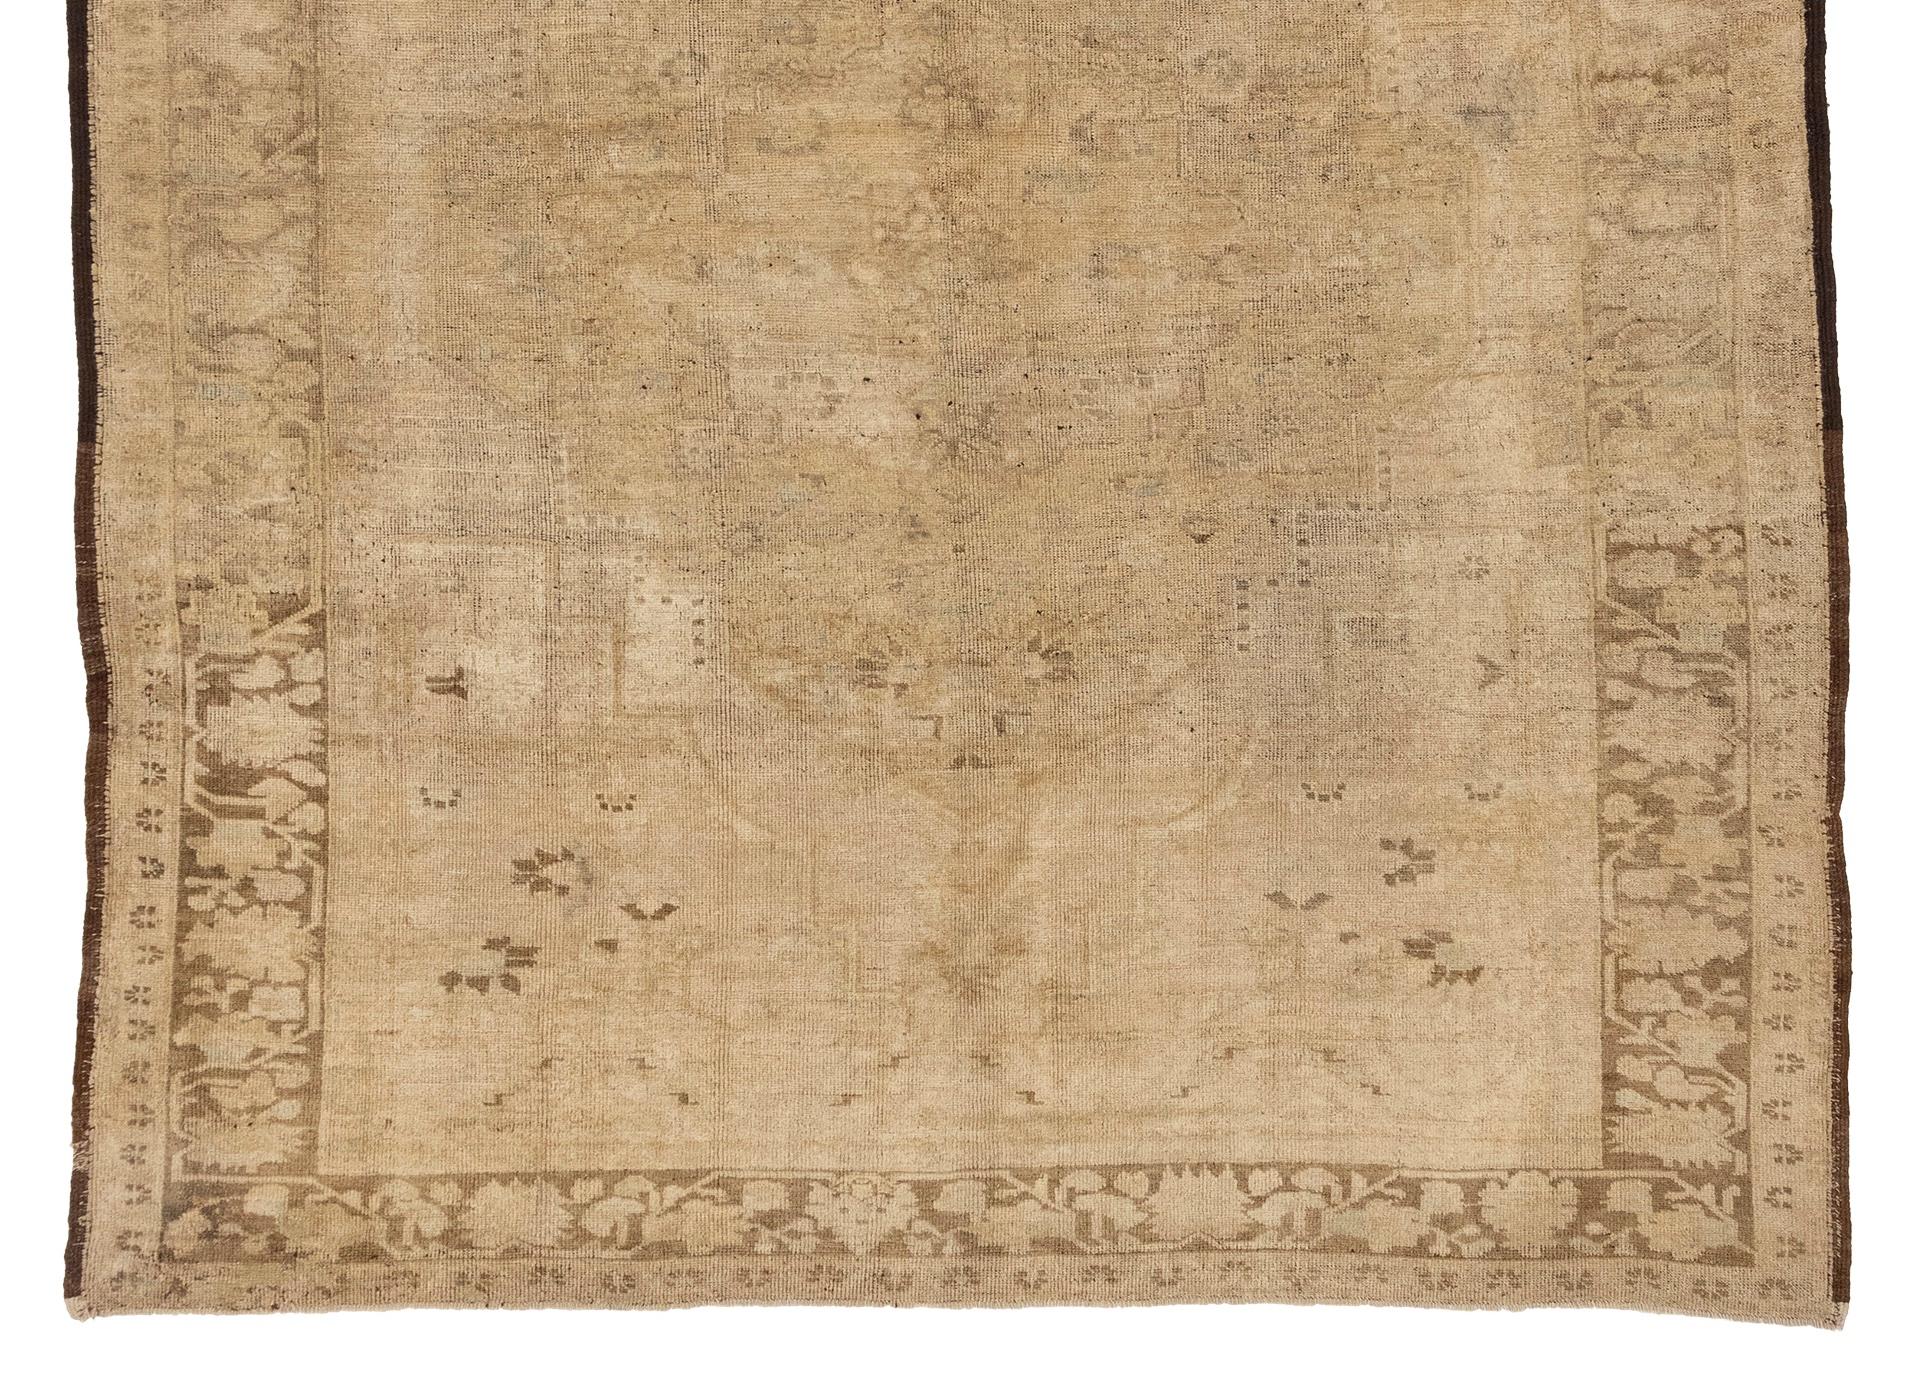 Vintage Oushak rugs are a type of handwoven rug that originated in Turkey. These rugs are known for their soft, muted color palettes, with beige and tan being particularly popular shades. Vintage Oushak rugs are prized for their fine craftsmanship,